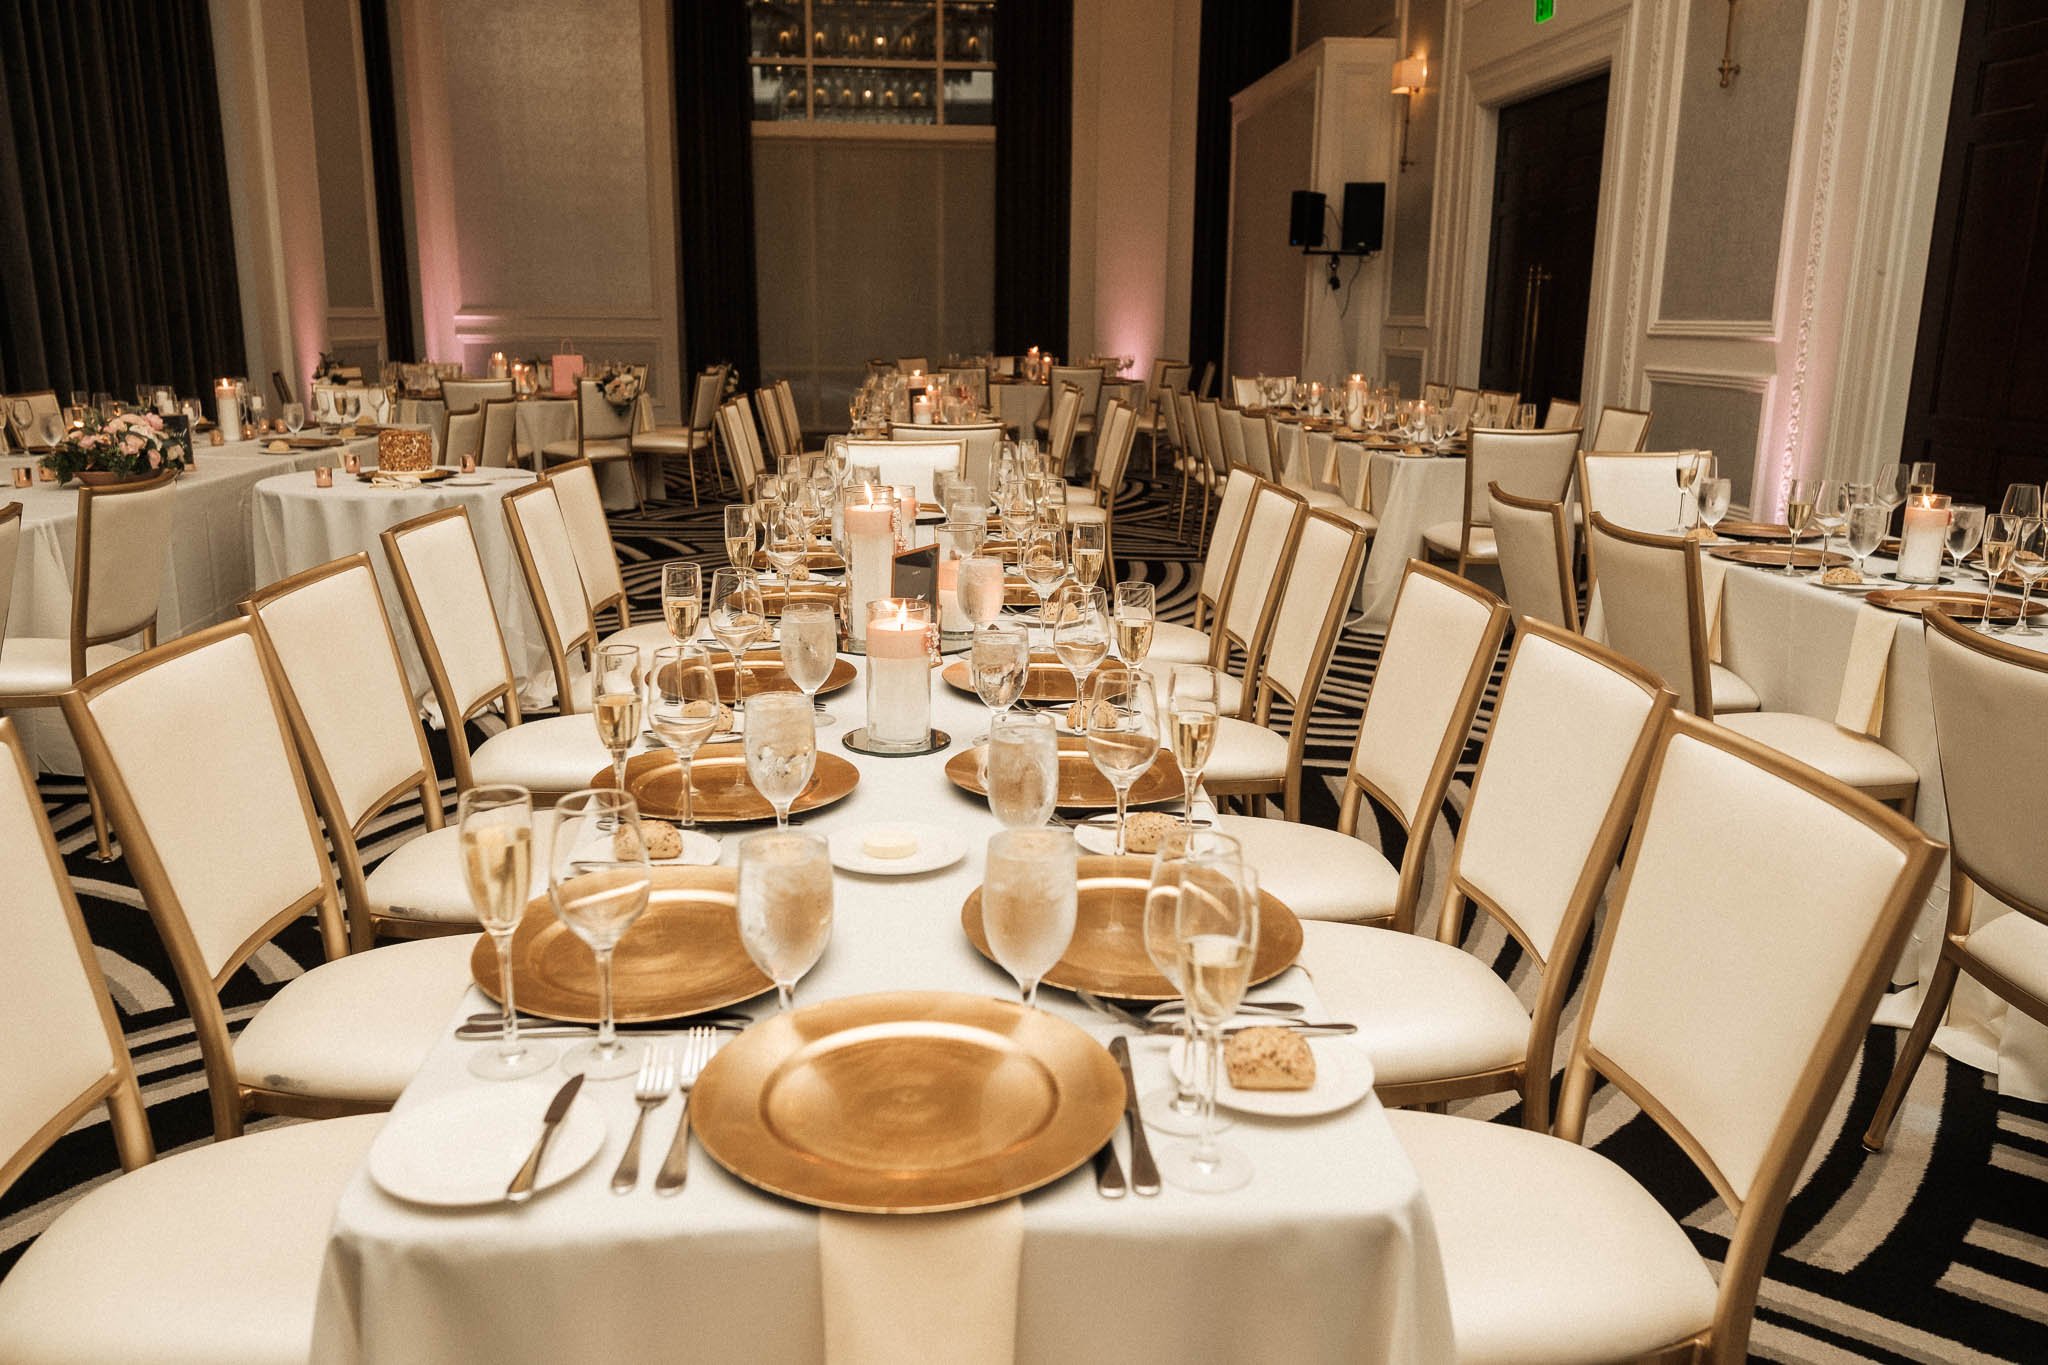  downtown pittsburgh wedding tablescape 